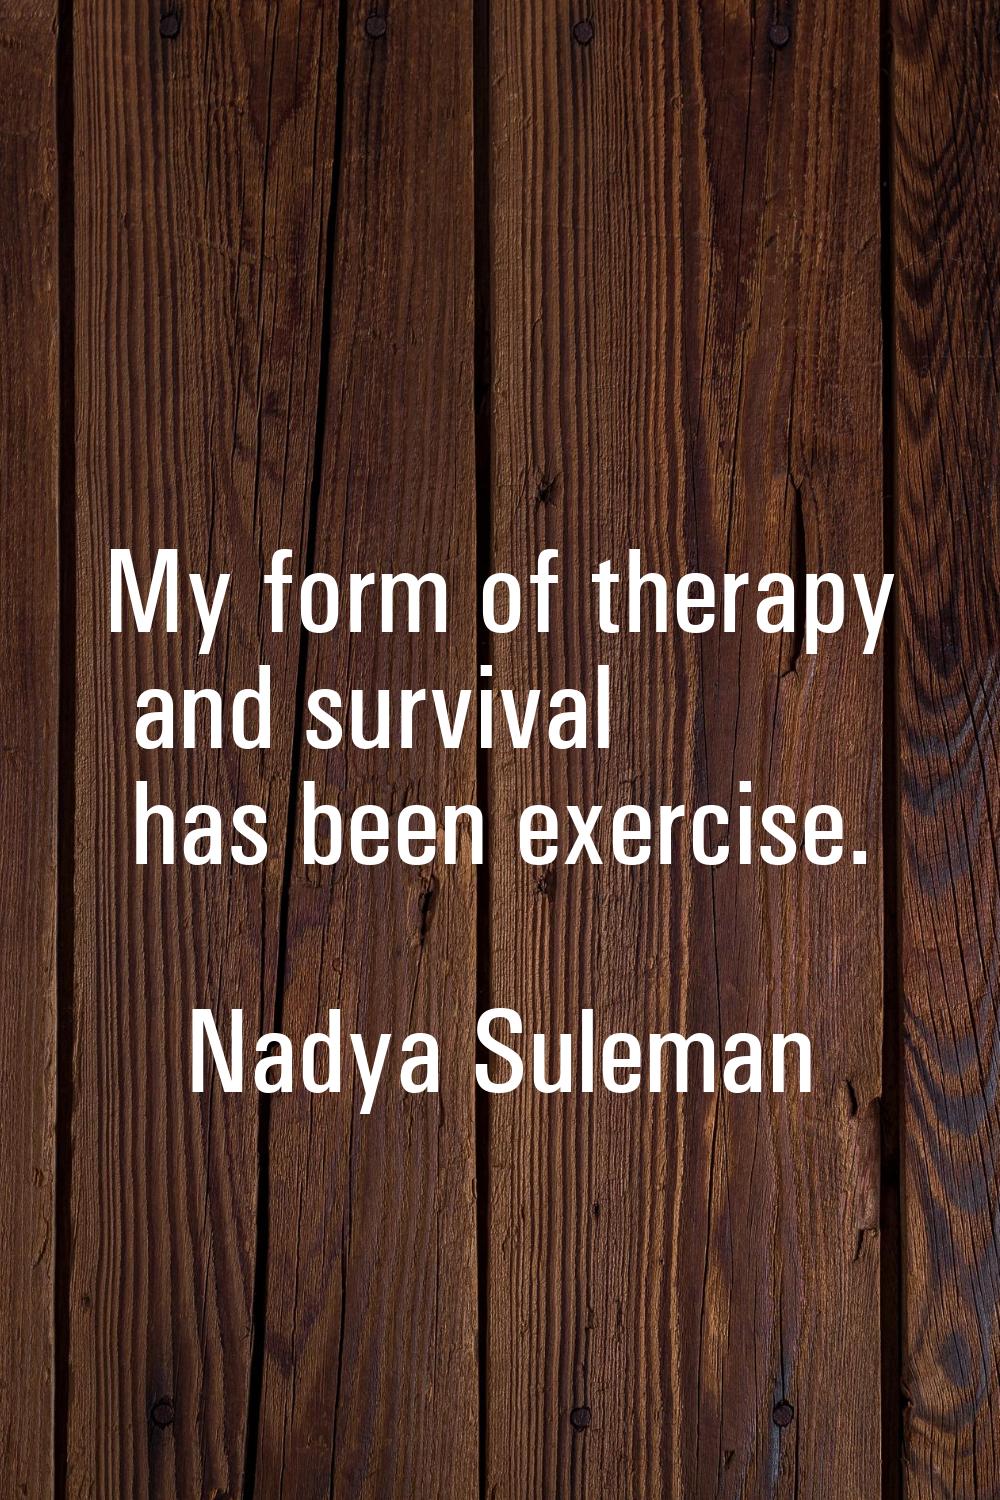 My form of therapy and survival has been exercise.